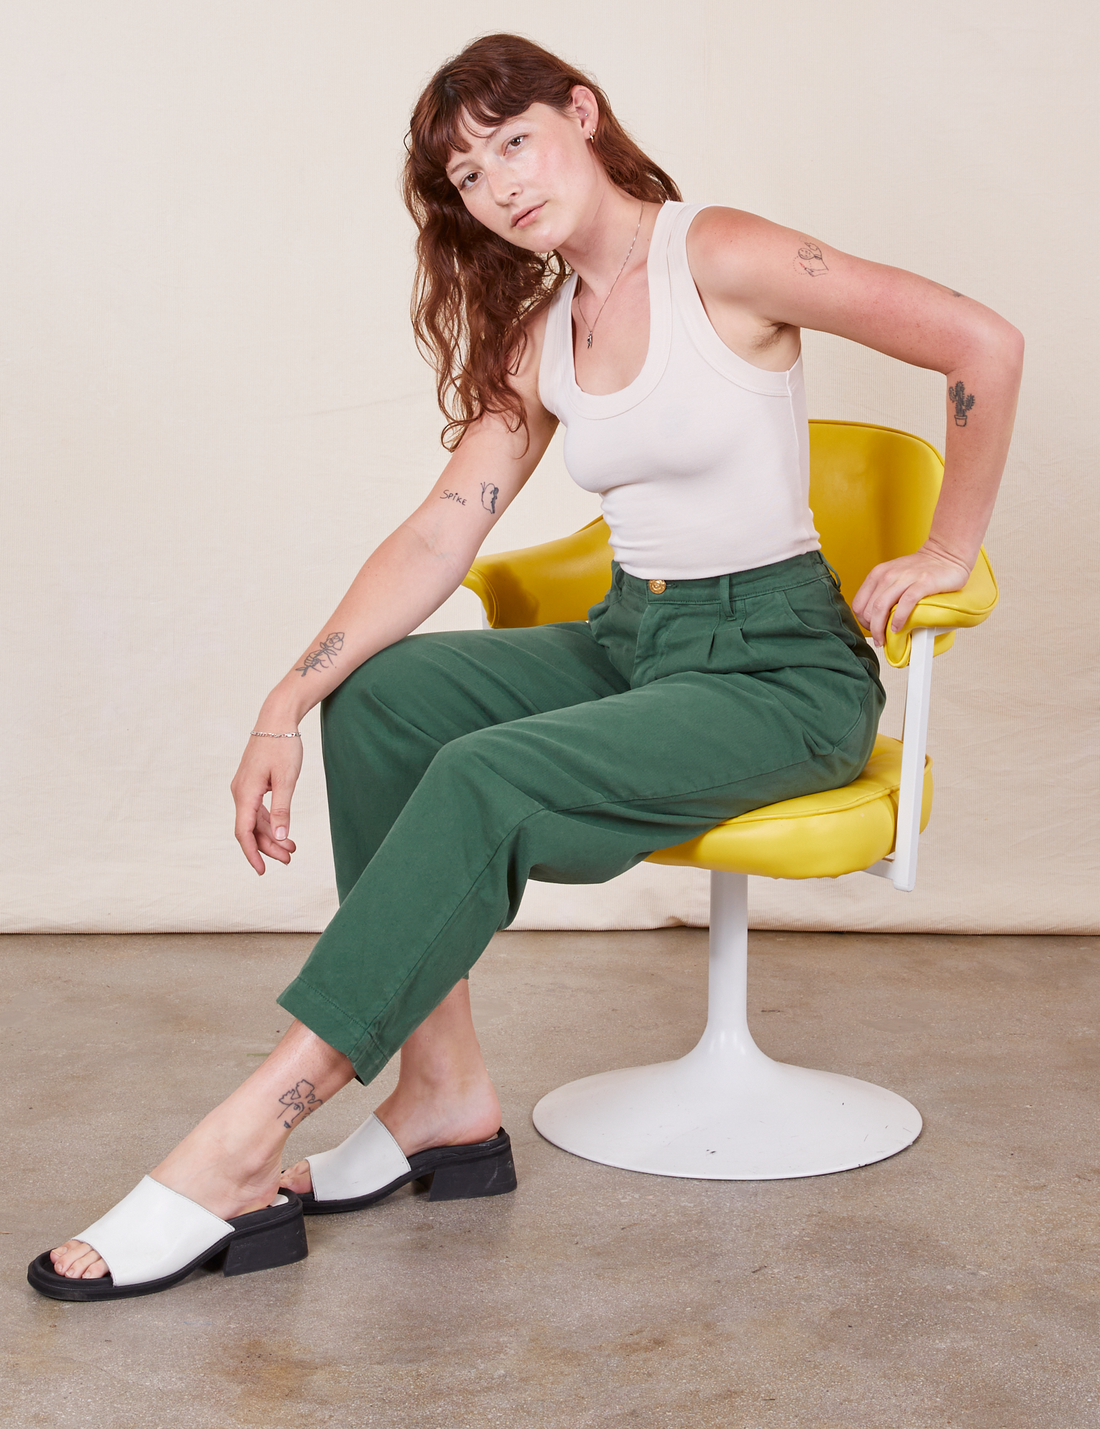 Alex is wearing Heavyweight Trousers in Dark Emerald Green and a vintage off-white Tank Top.